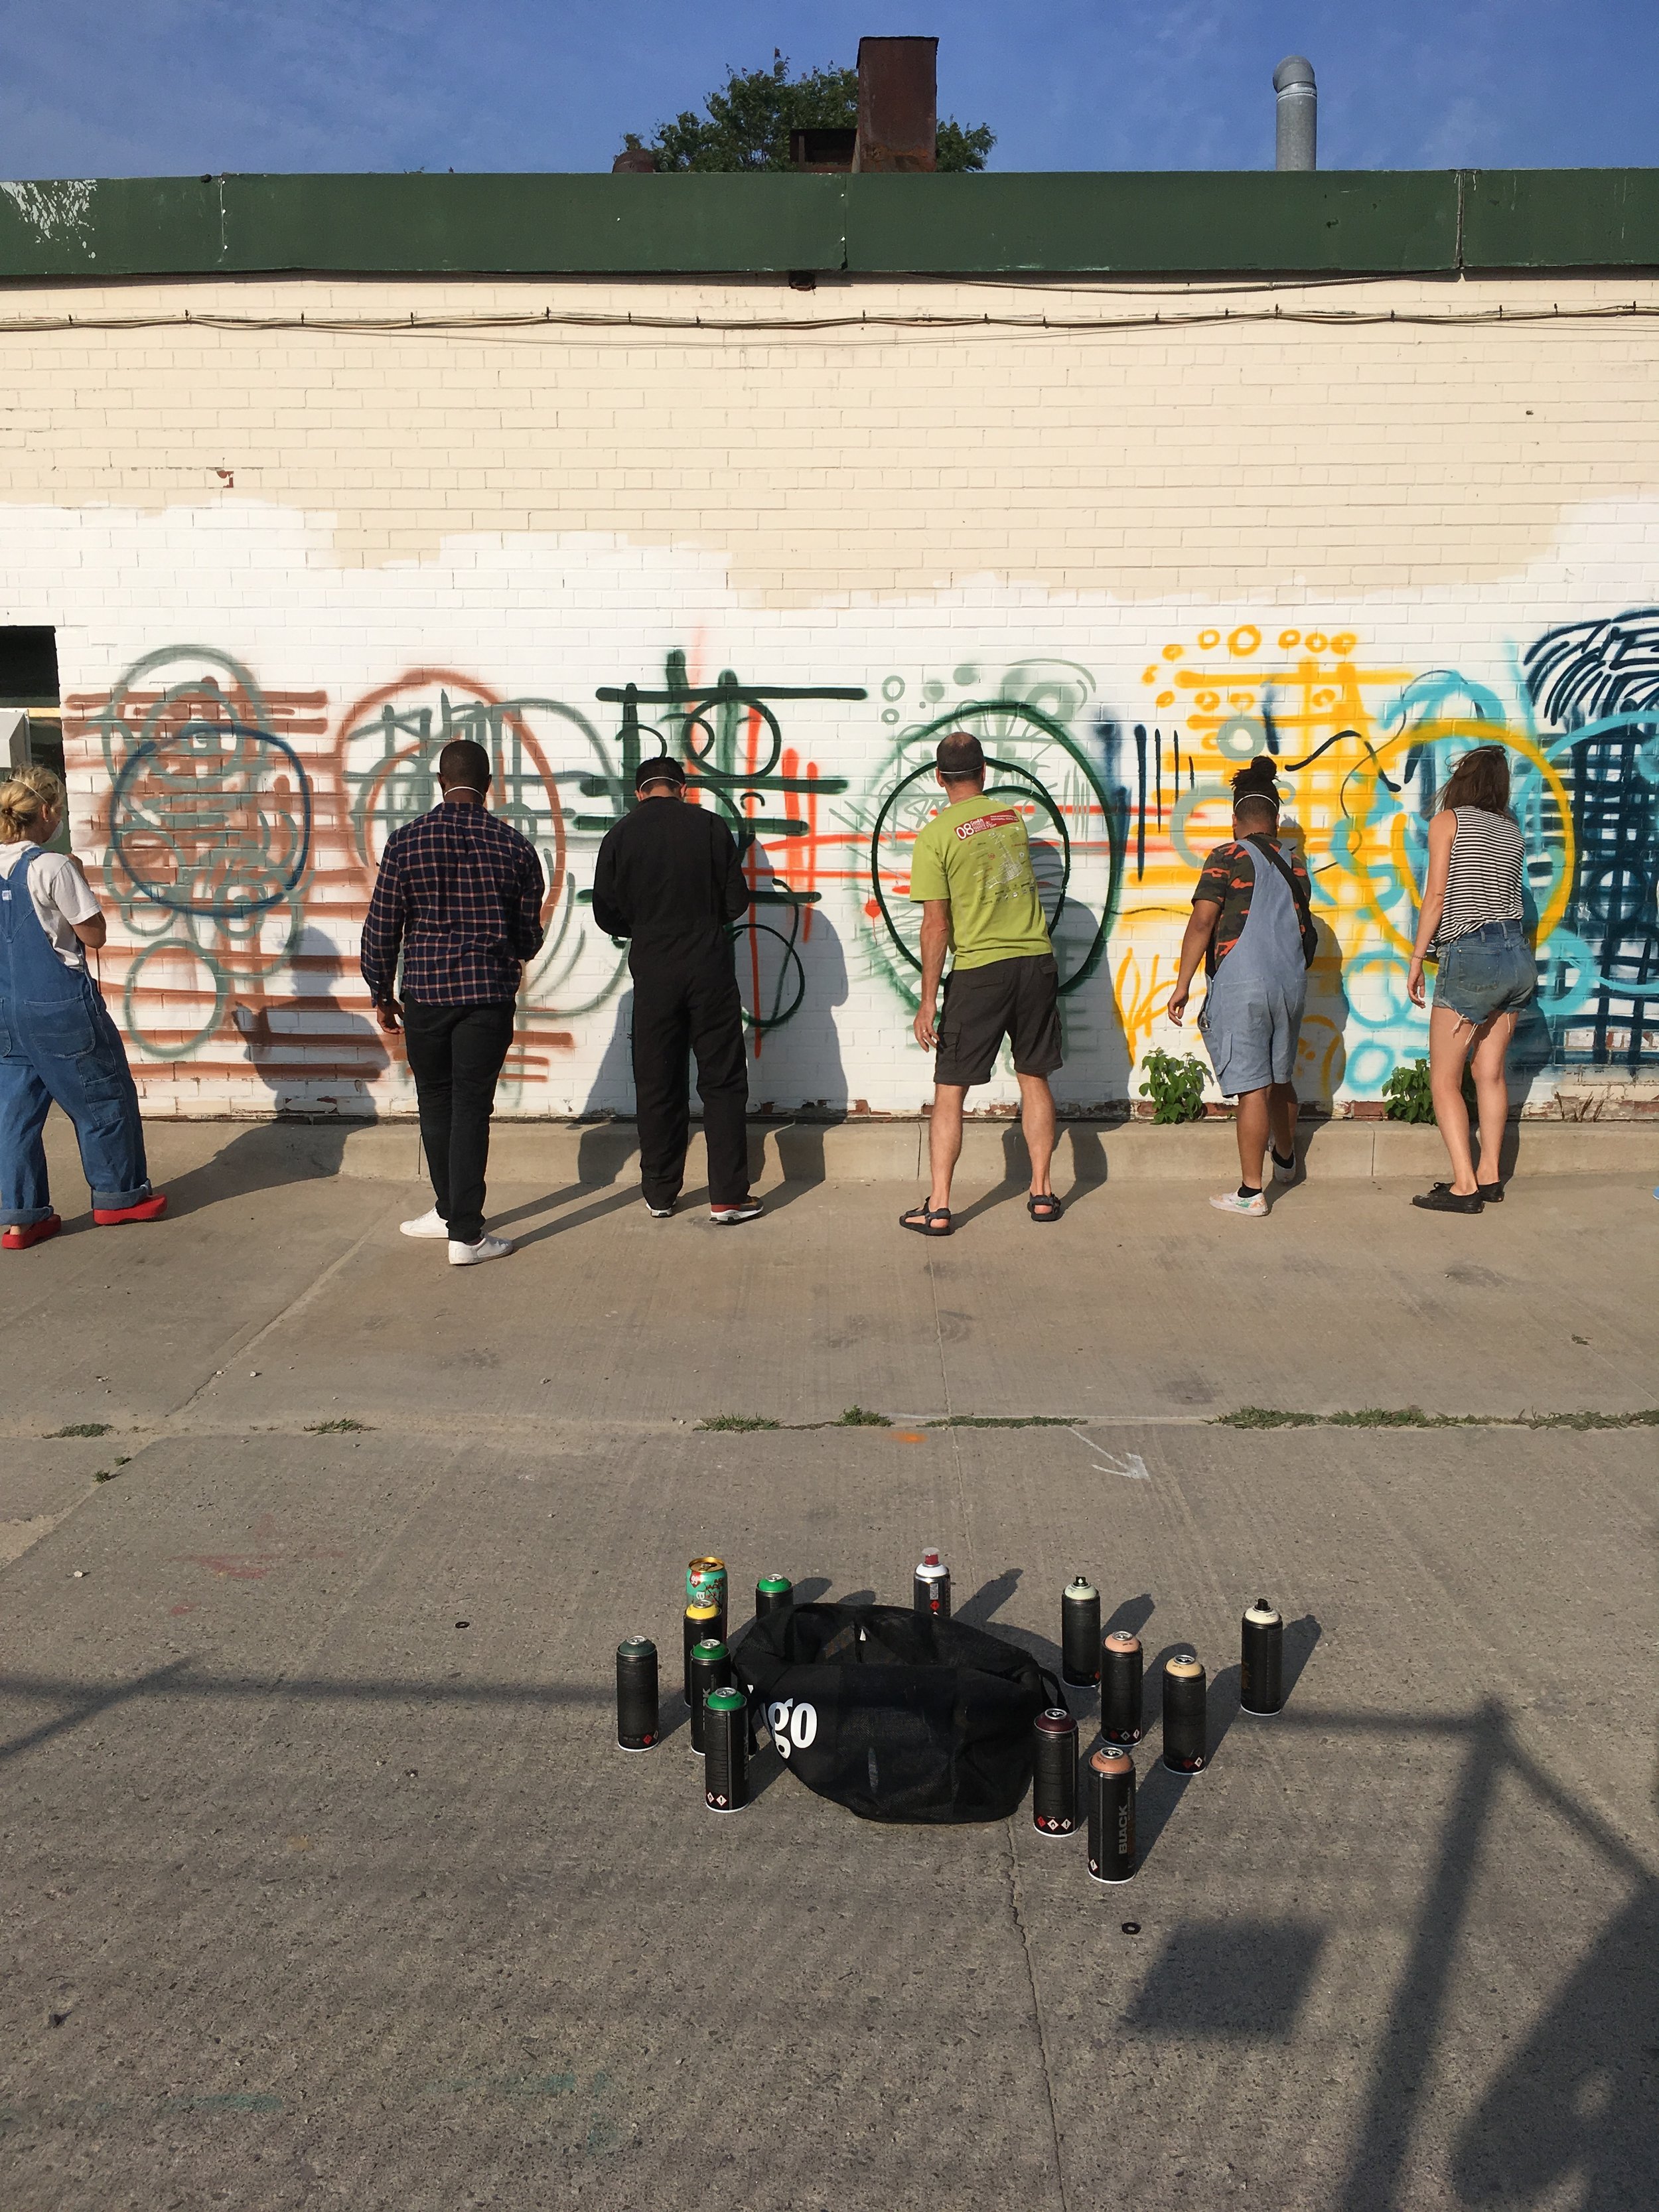 2018 - Graffiti workshop at Akin St Clair with Moises Frank